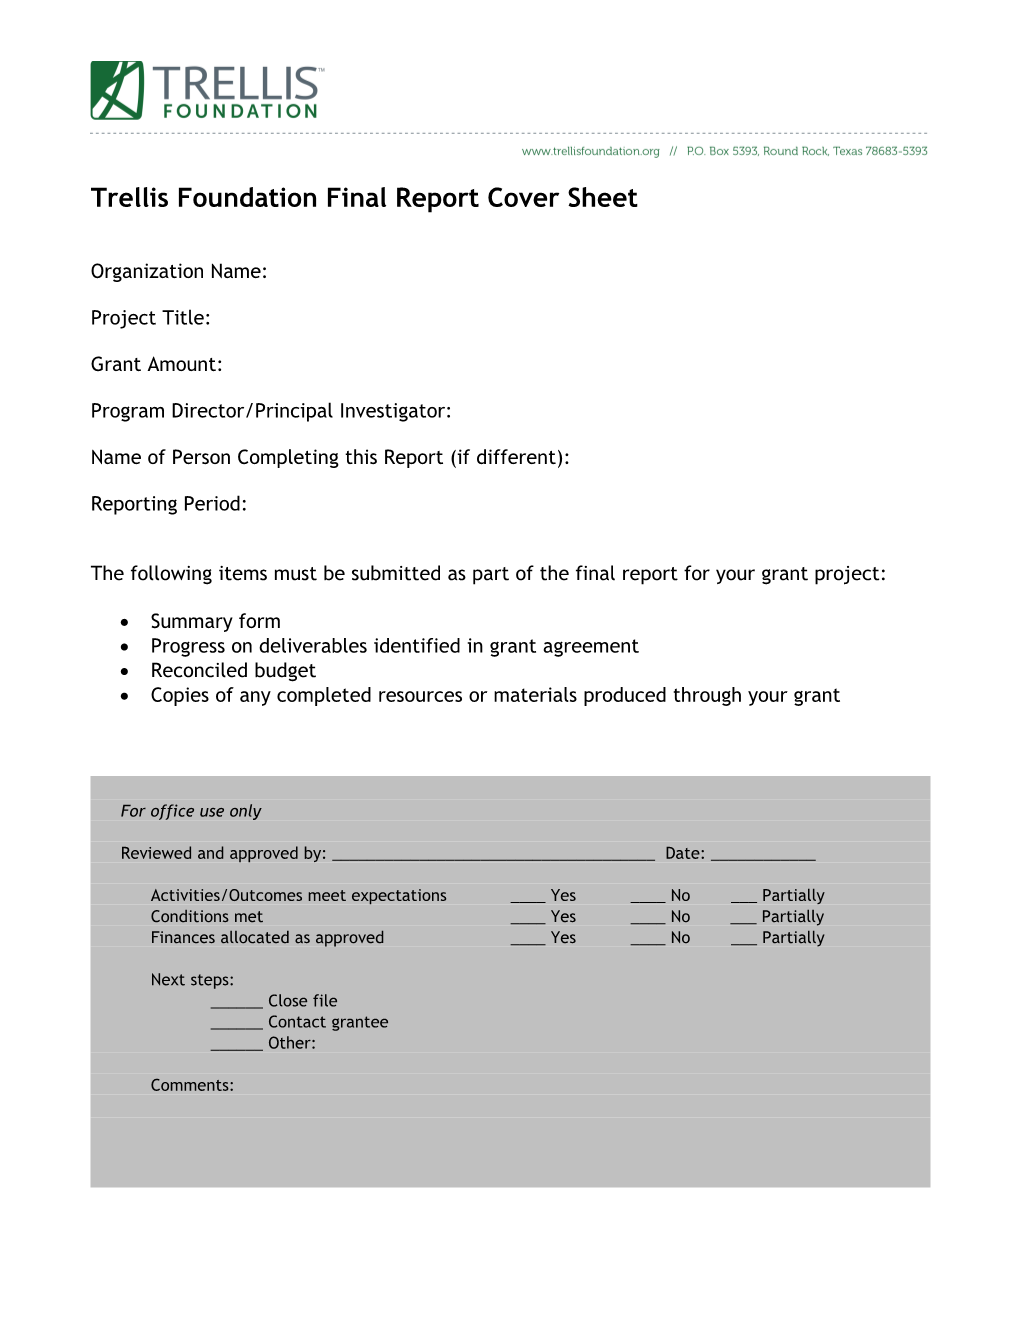 Final Report Summary Form